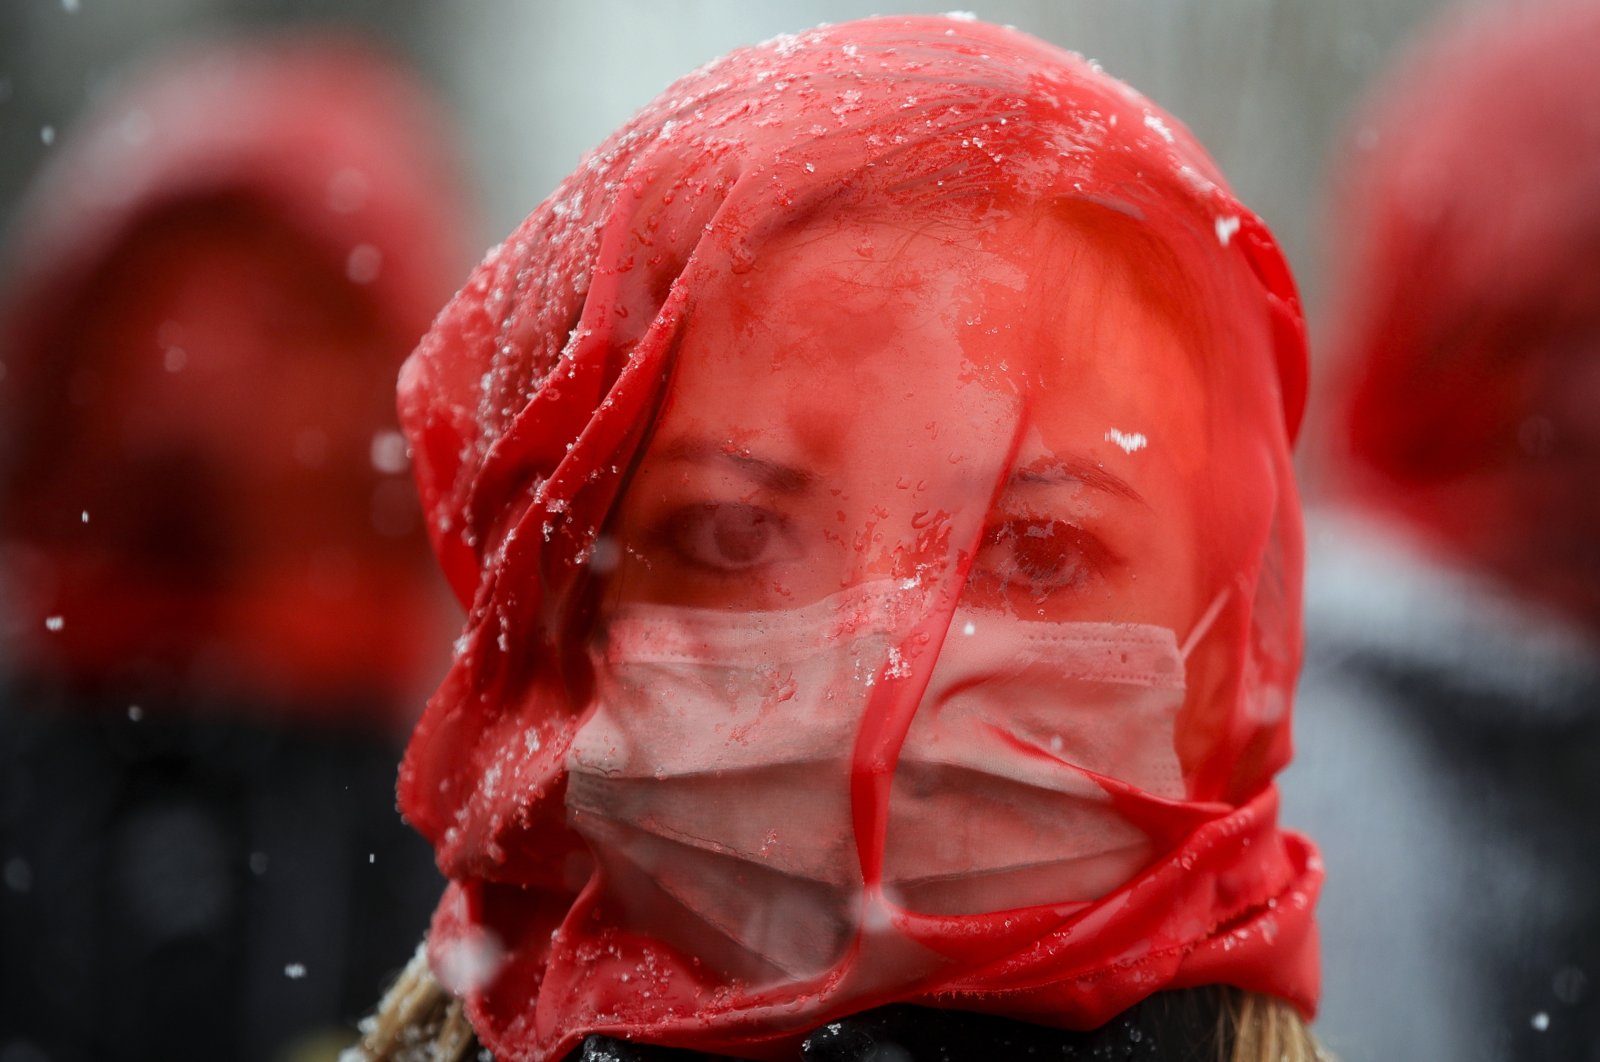 A woman wears a red veil during a flashmob to raise awareness of the increased levels of violence against women since the COVID-19 pandemic started one year ago, in Bucharest, Romania, March 10, 2021. (AP Photo)